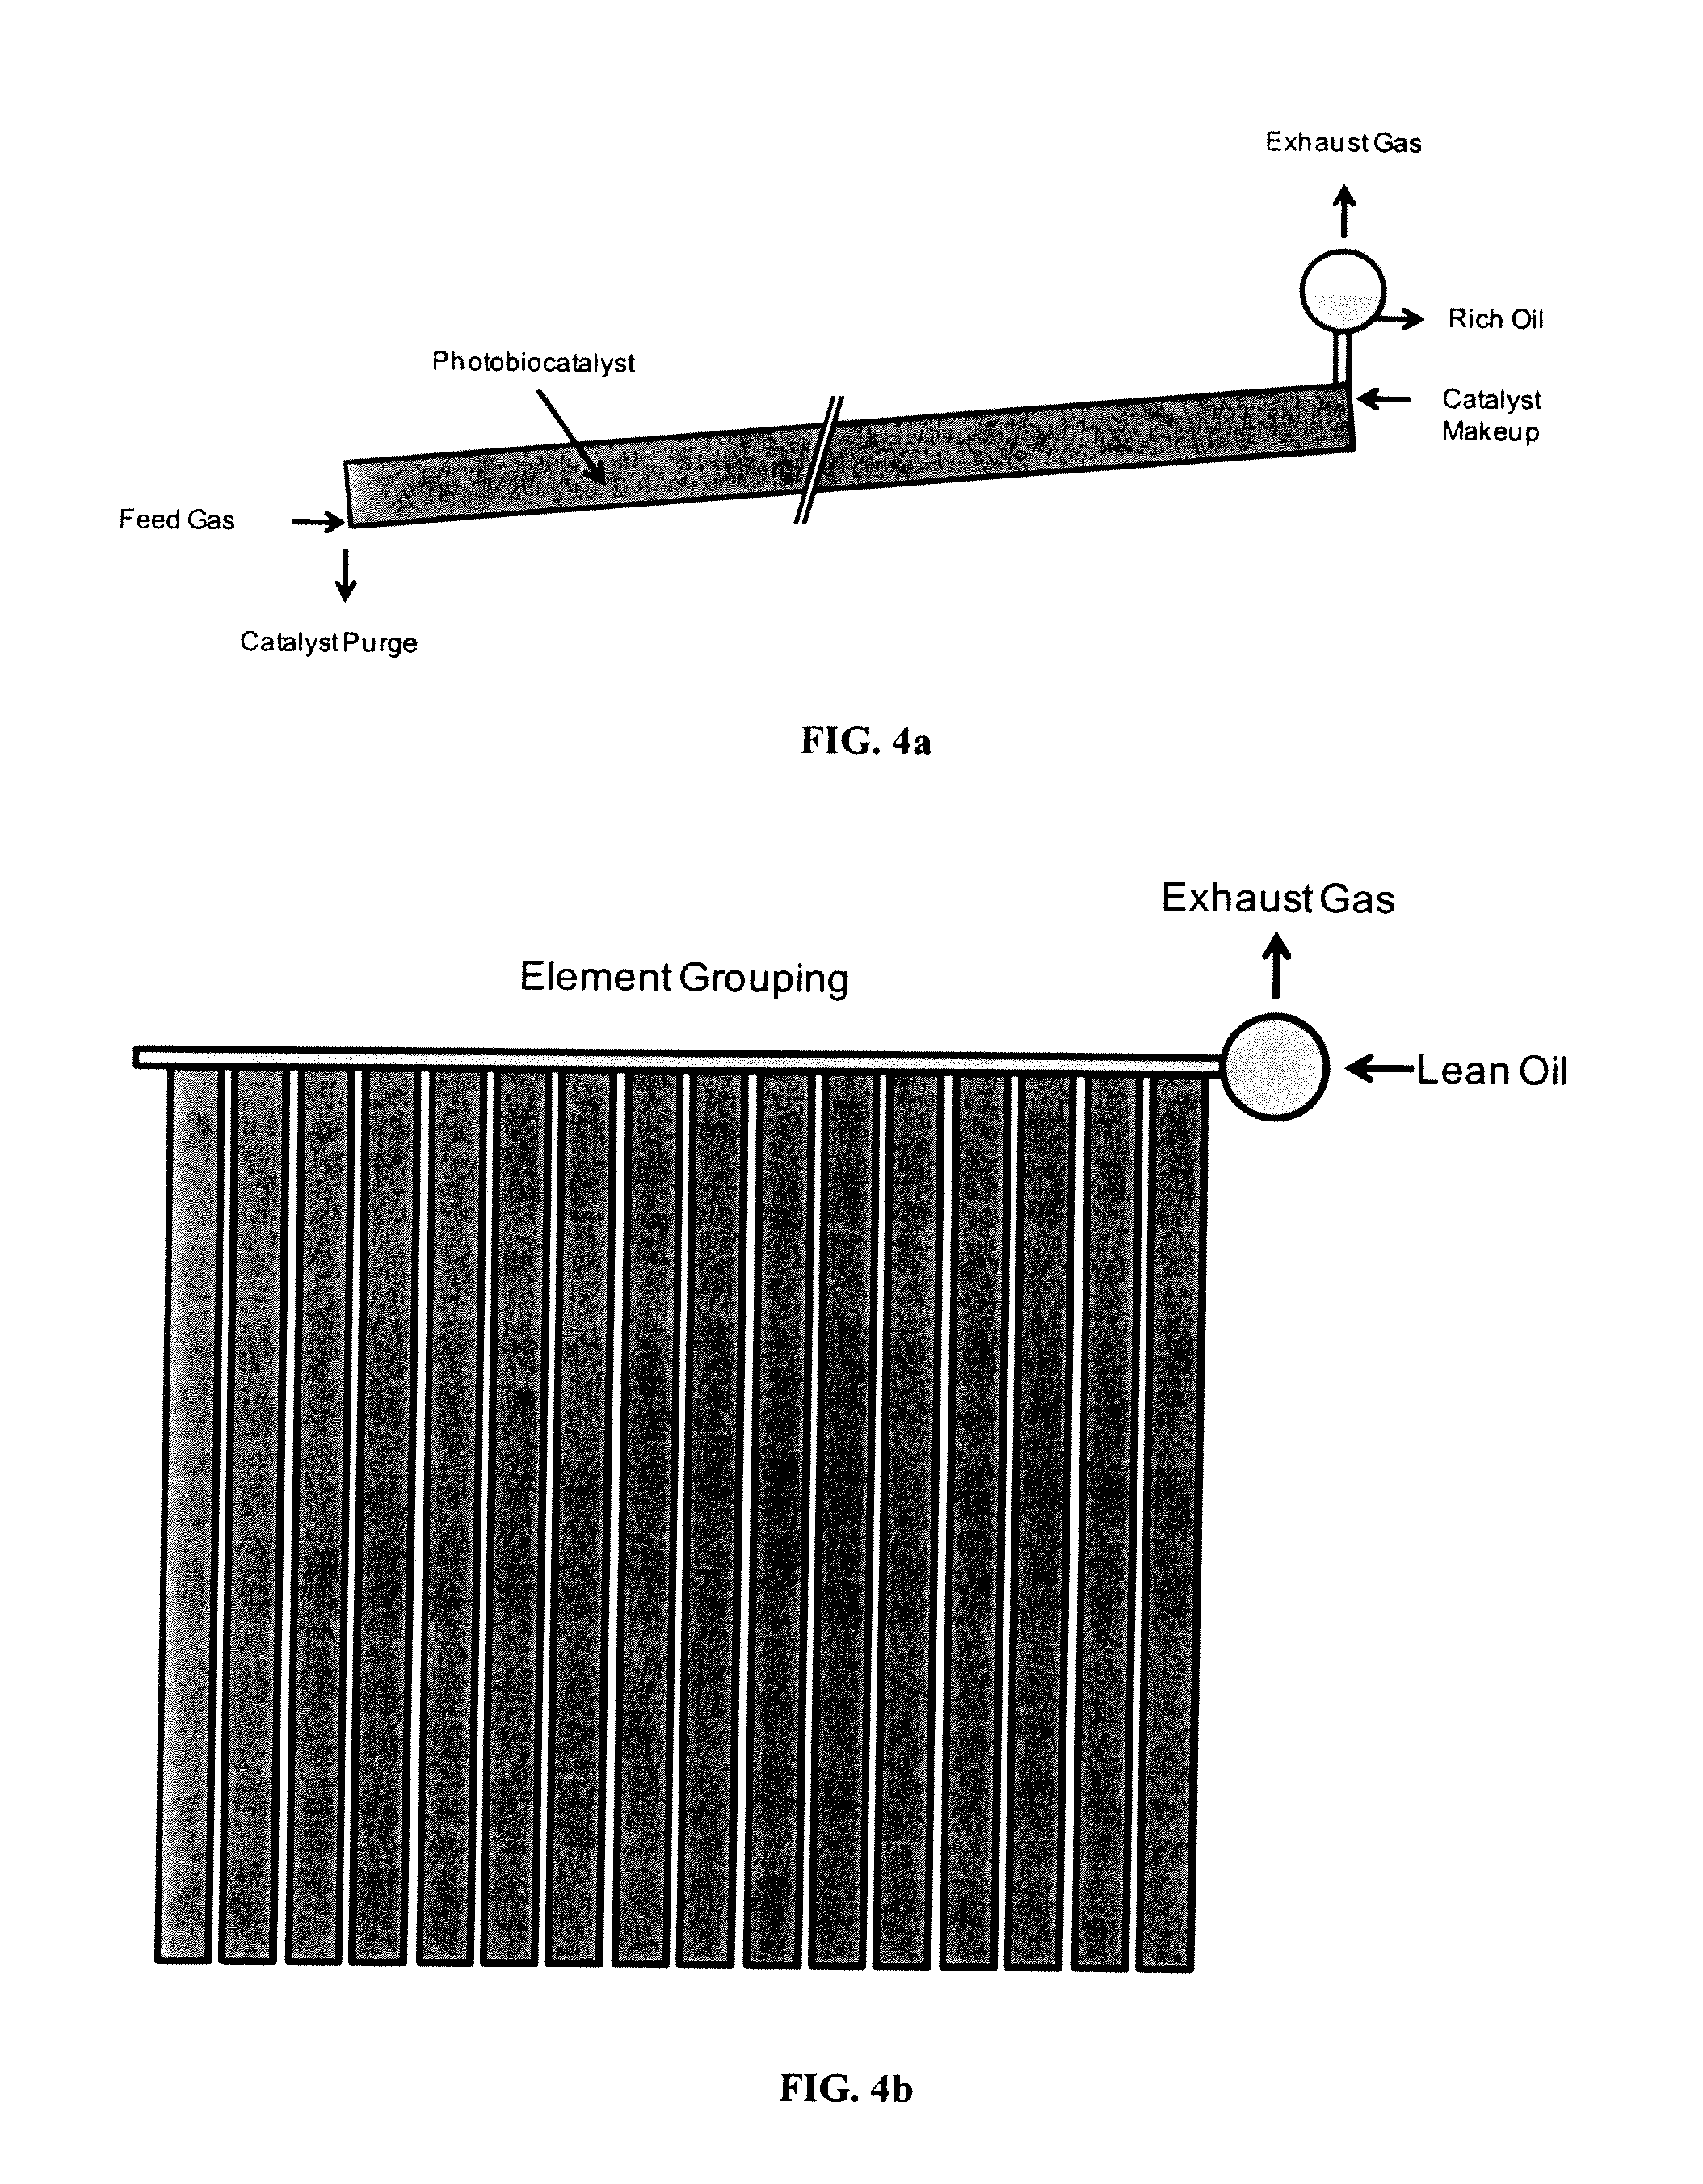 System for photobiosynthetic production, separation and saturation of carbonaceous chemicals and fuels